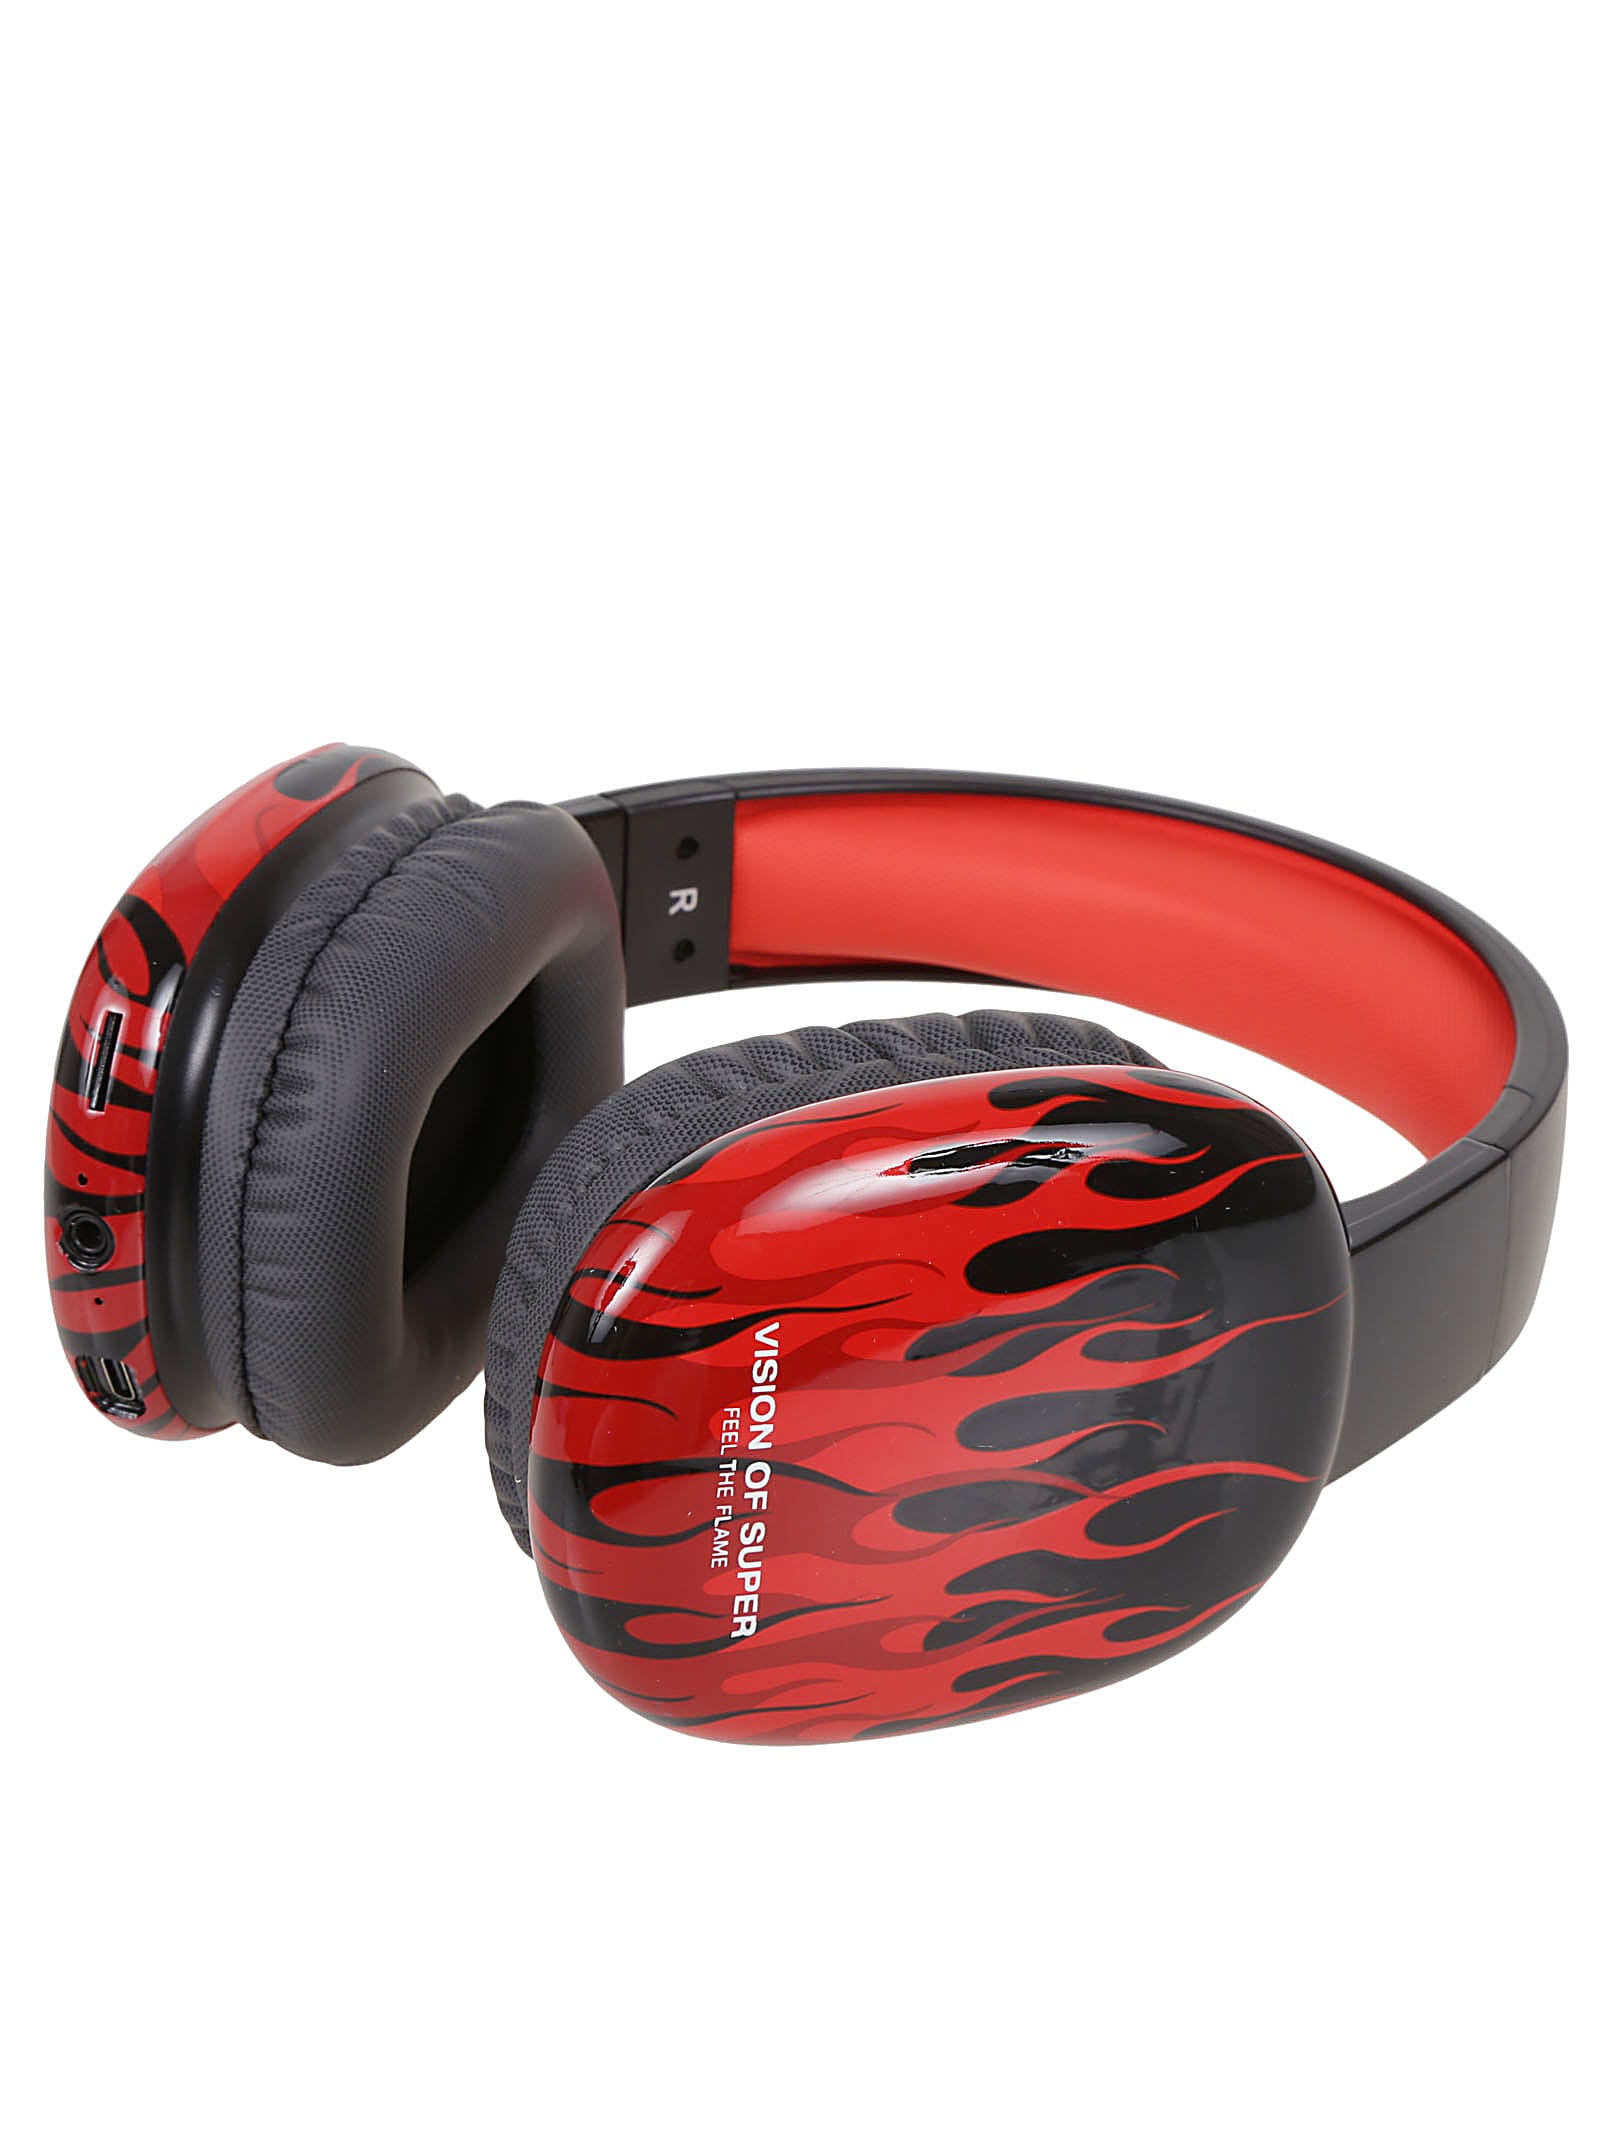 Vision Of Super Black Headphones With Red Flames And White Logo